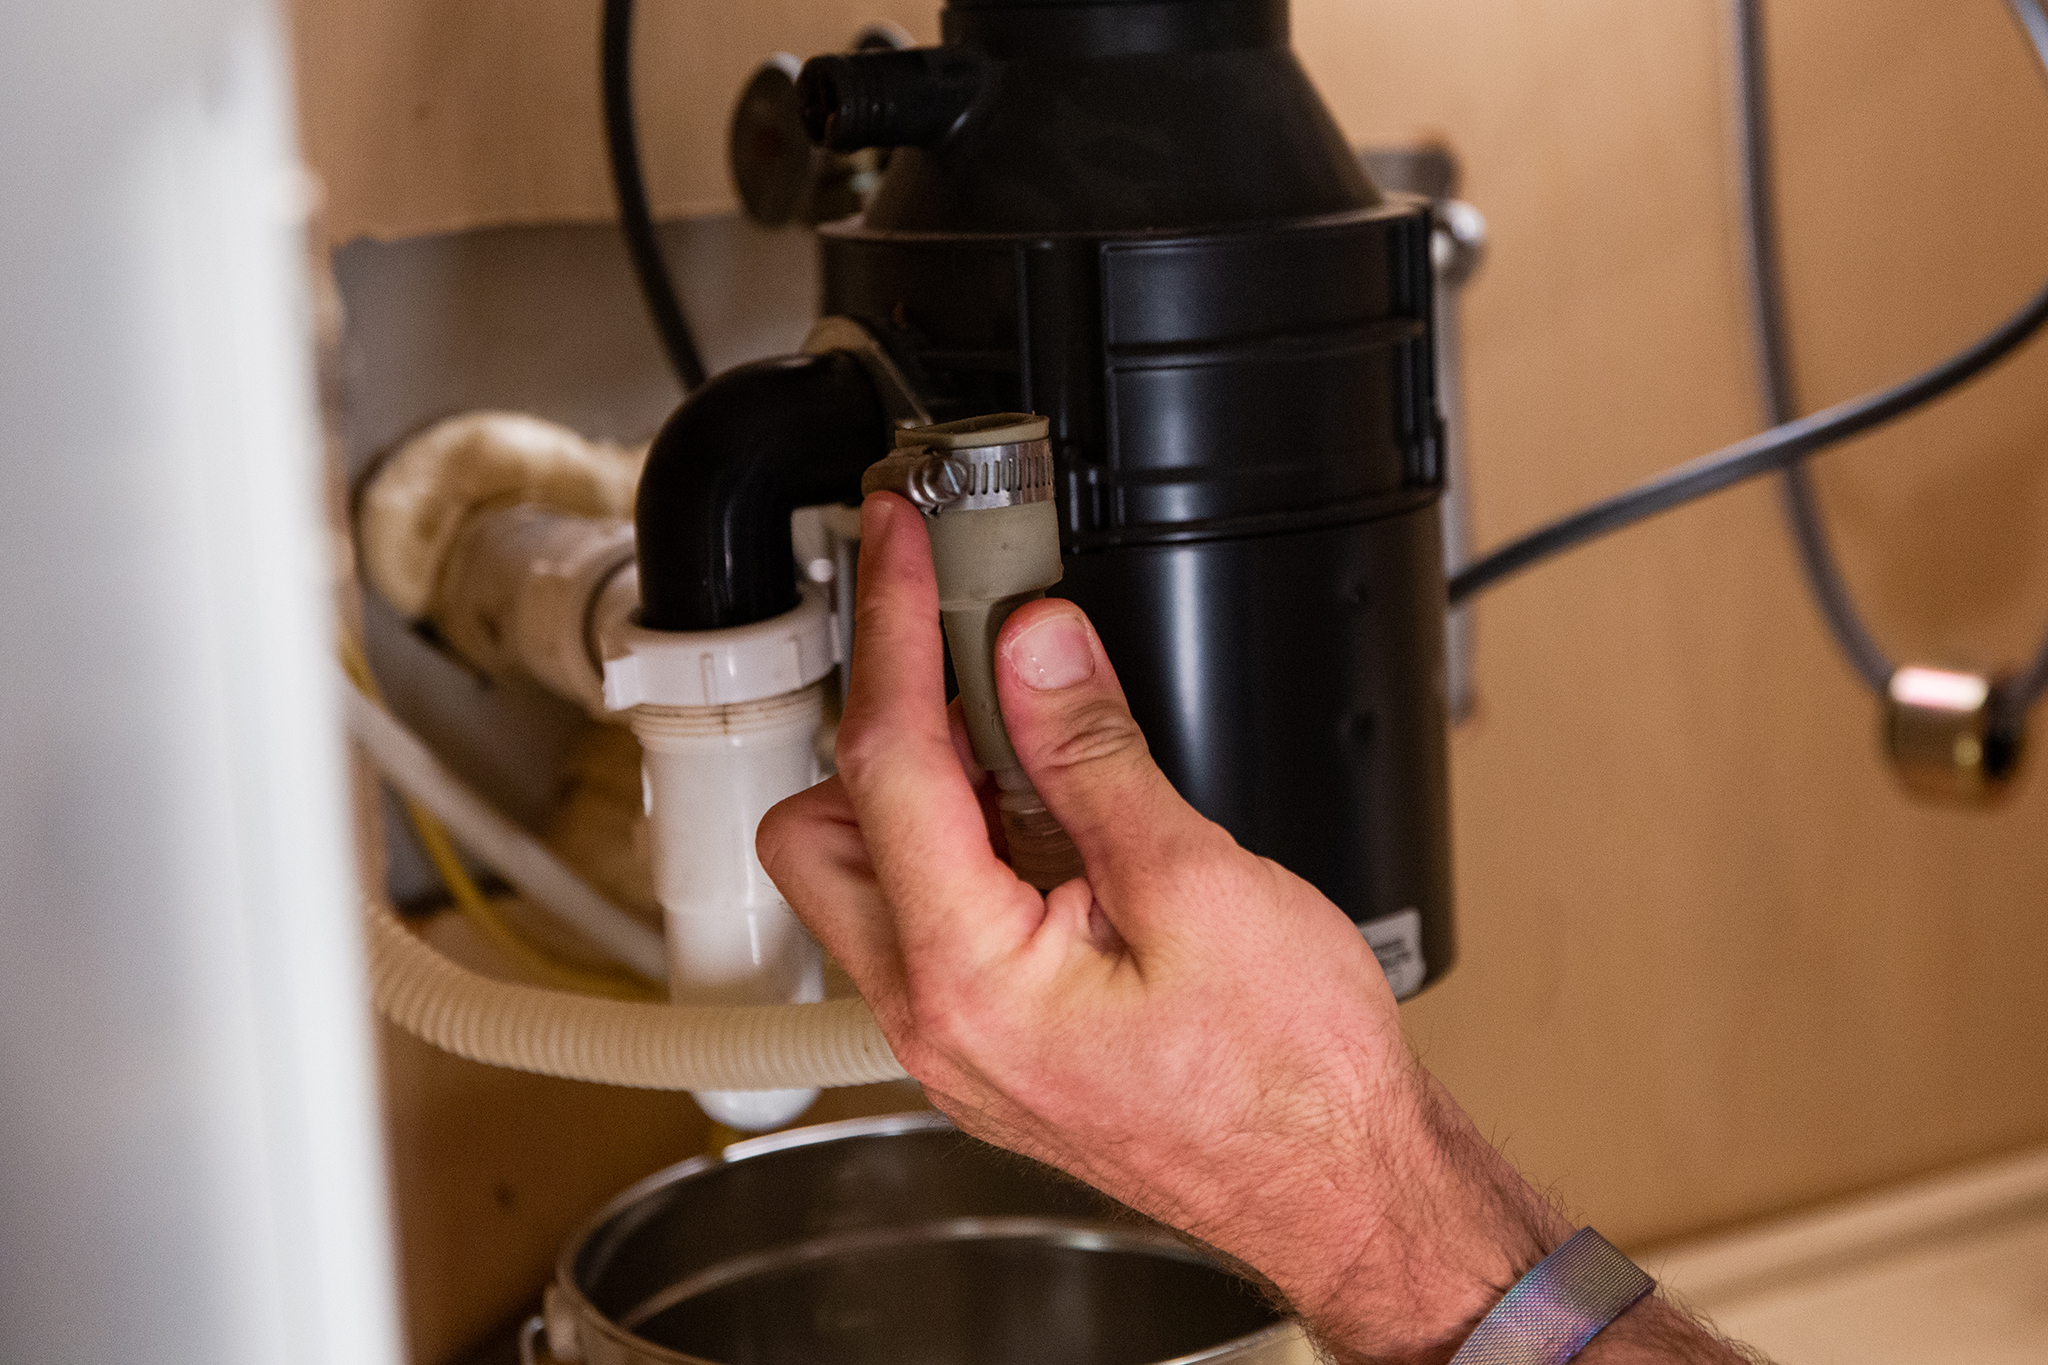 how to remove a garbage disposal permanently